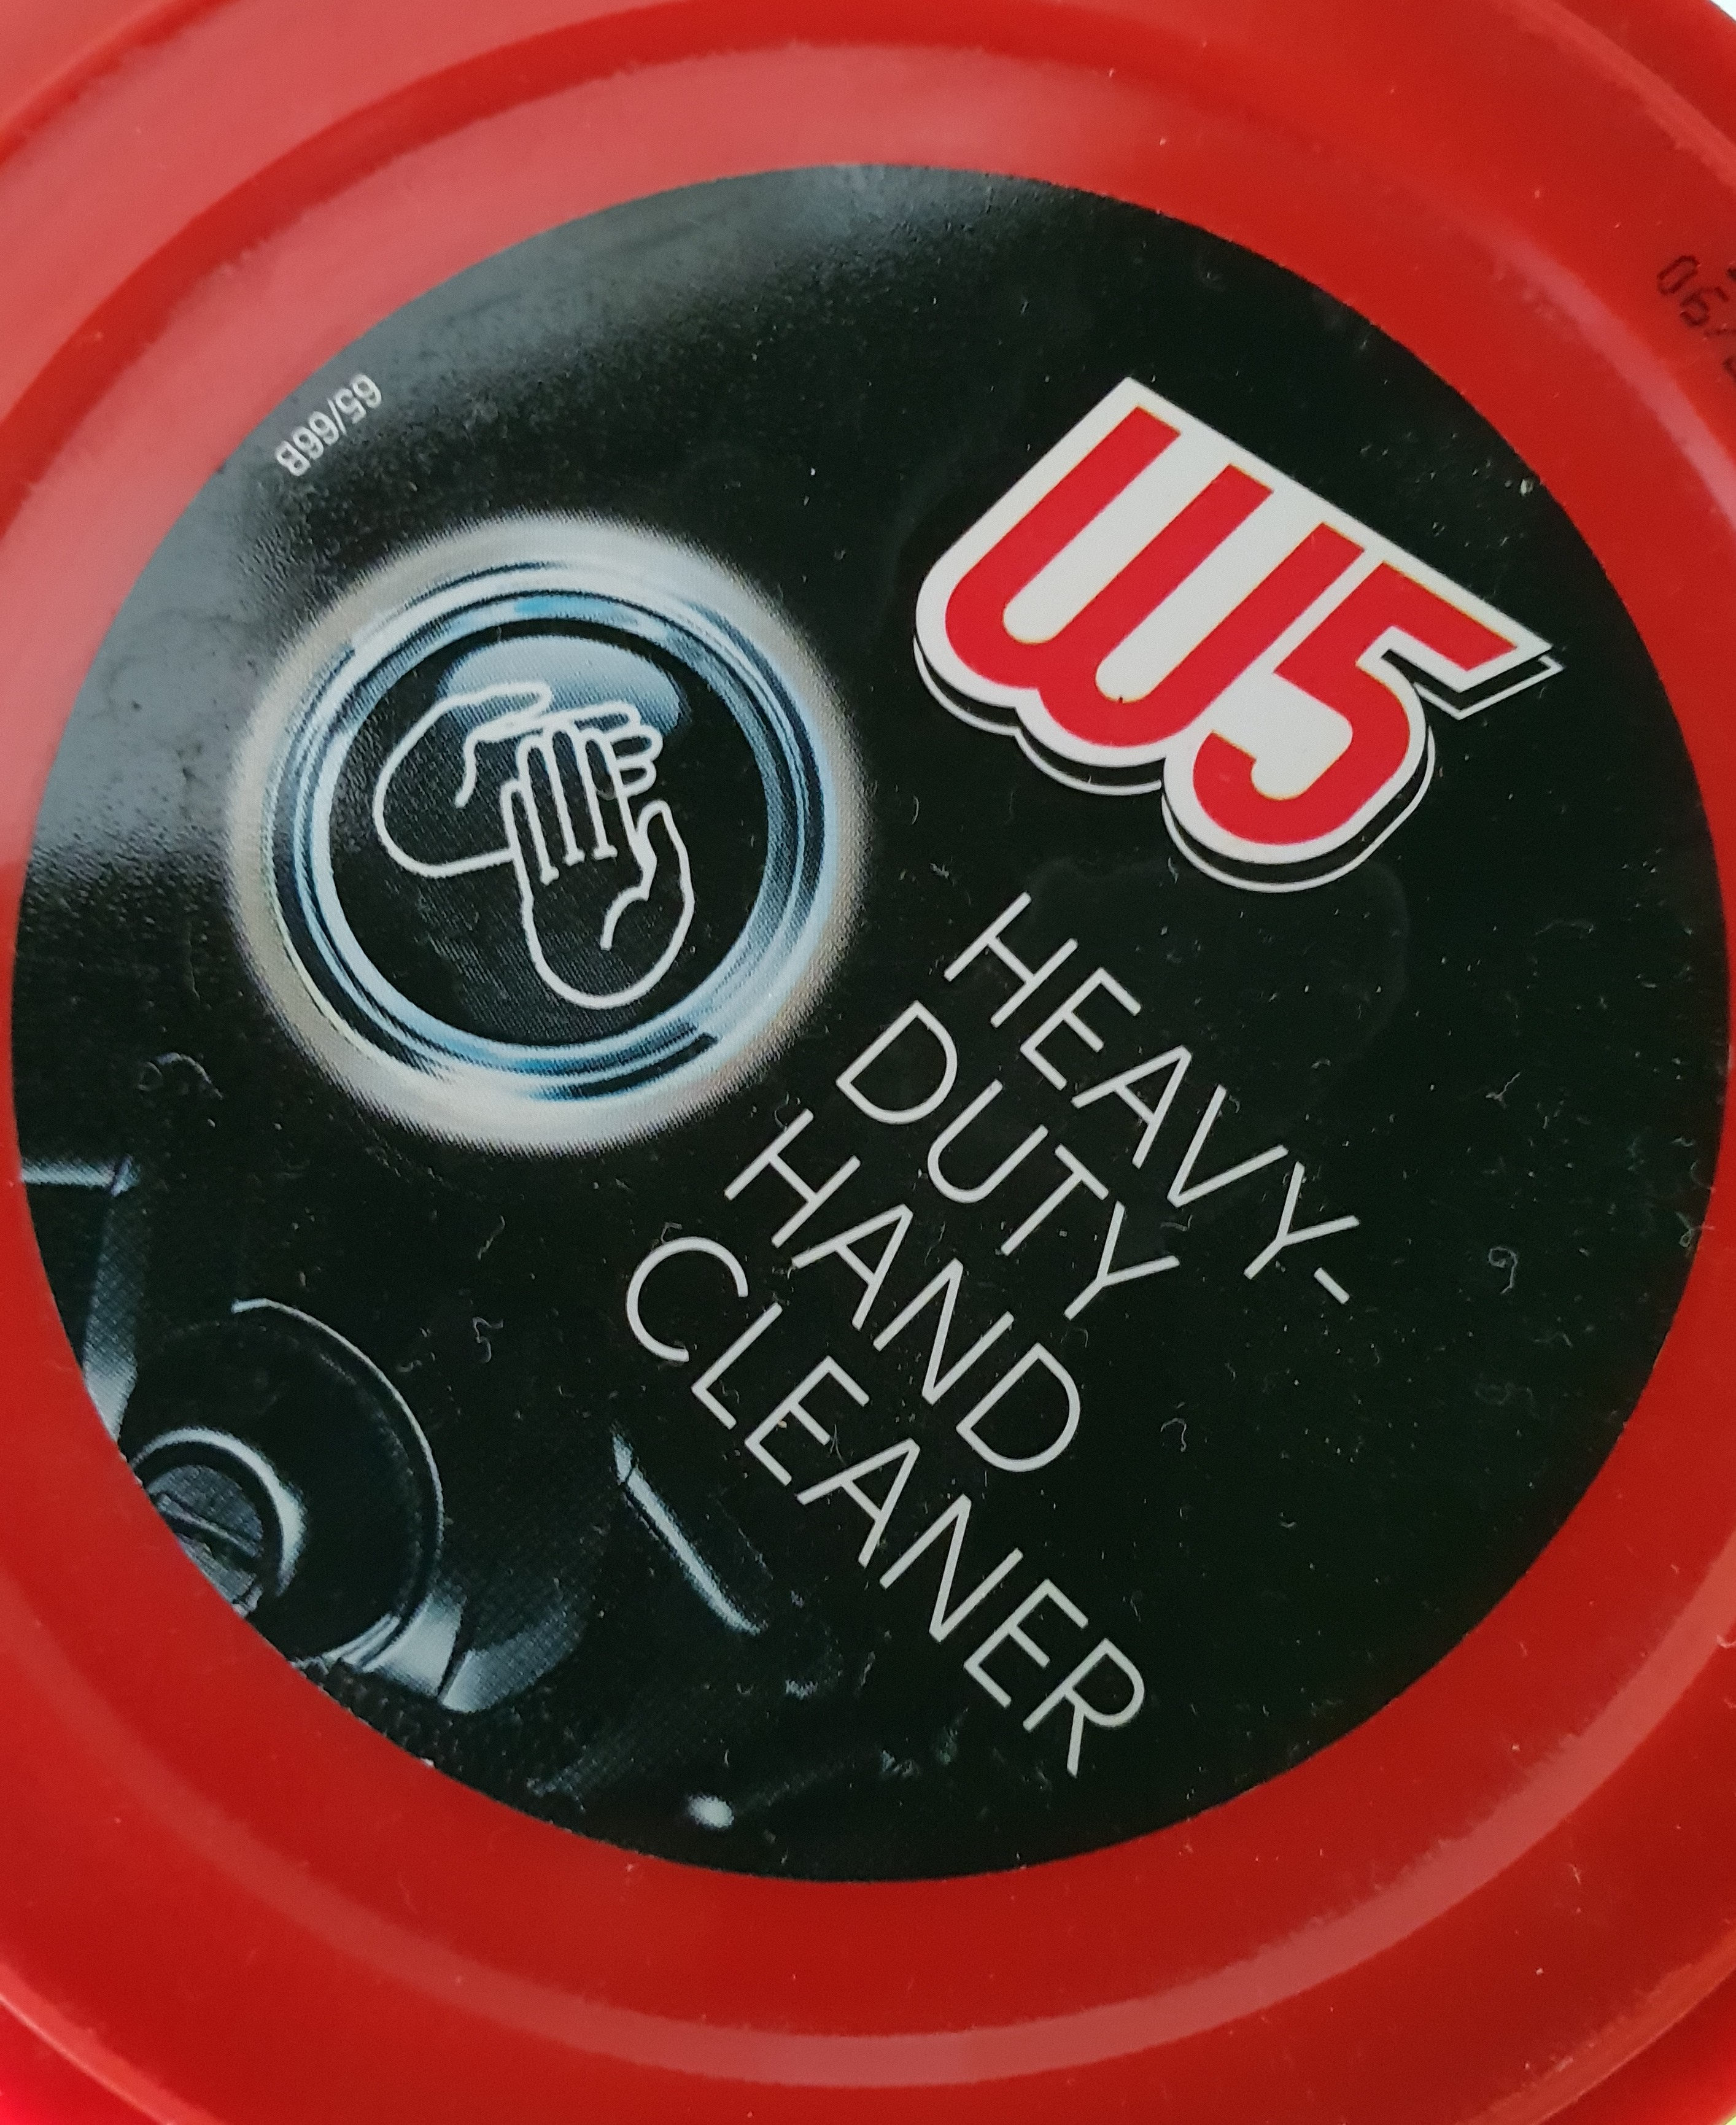 heavy duty hand cleaner - Product - fr